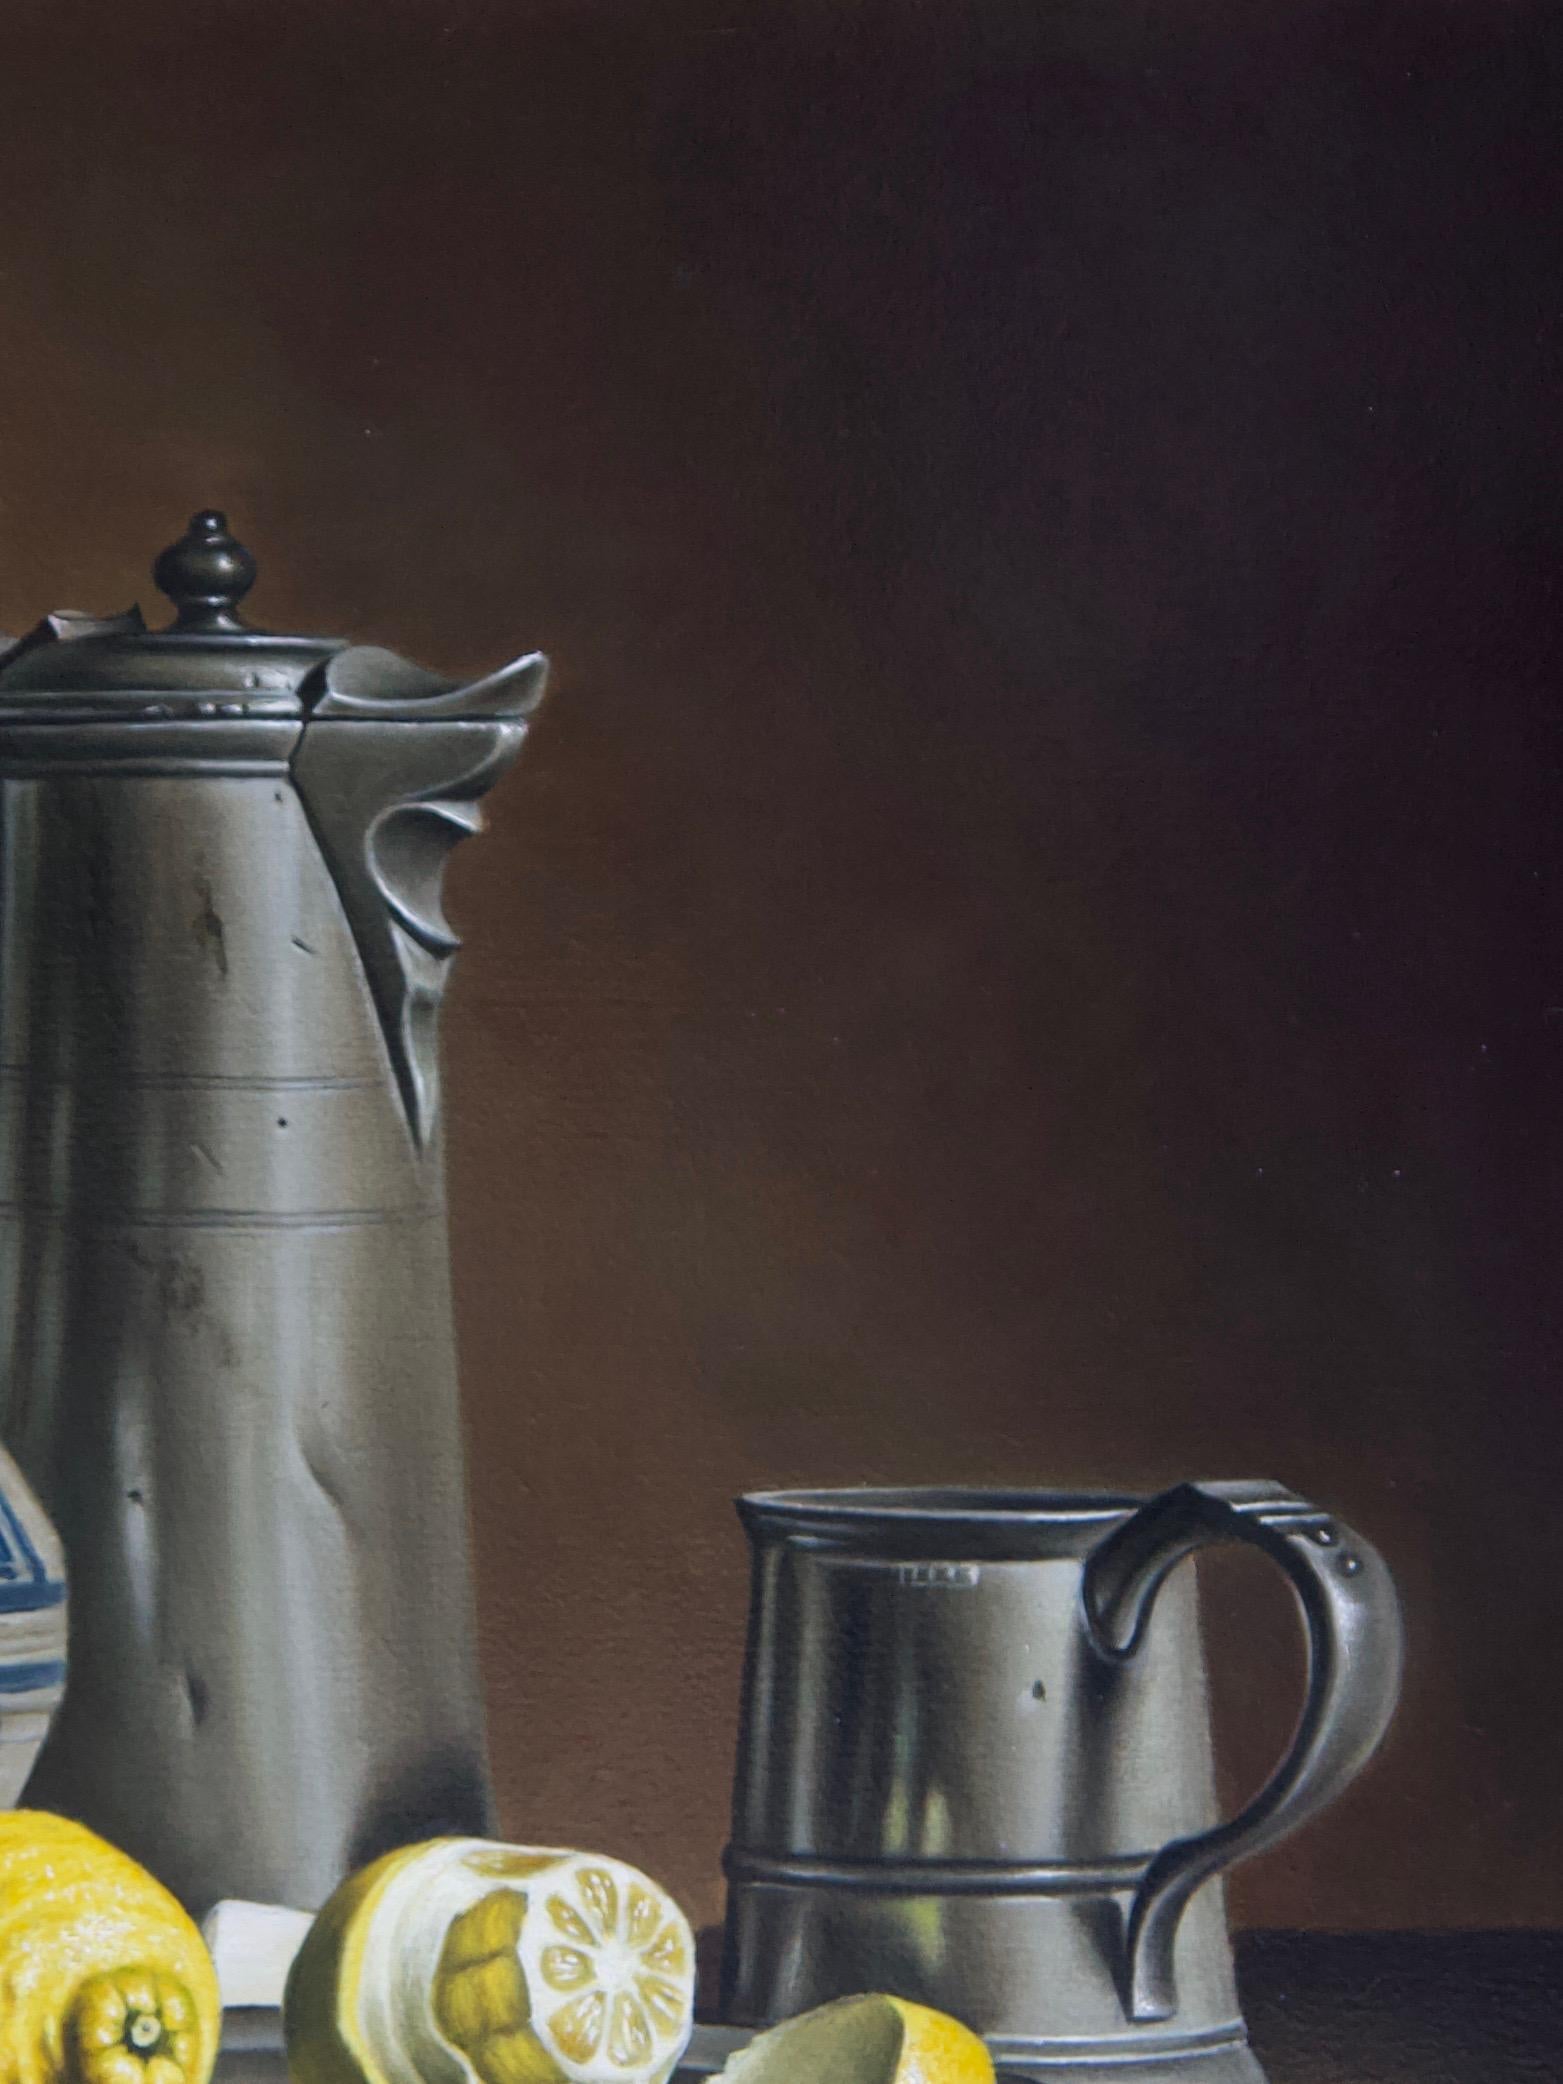 Pewter and Lemons - Realist Painting by Stefaan Eyckmans